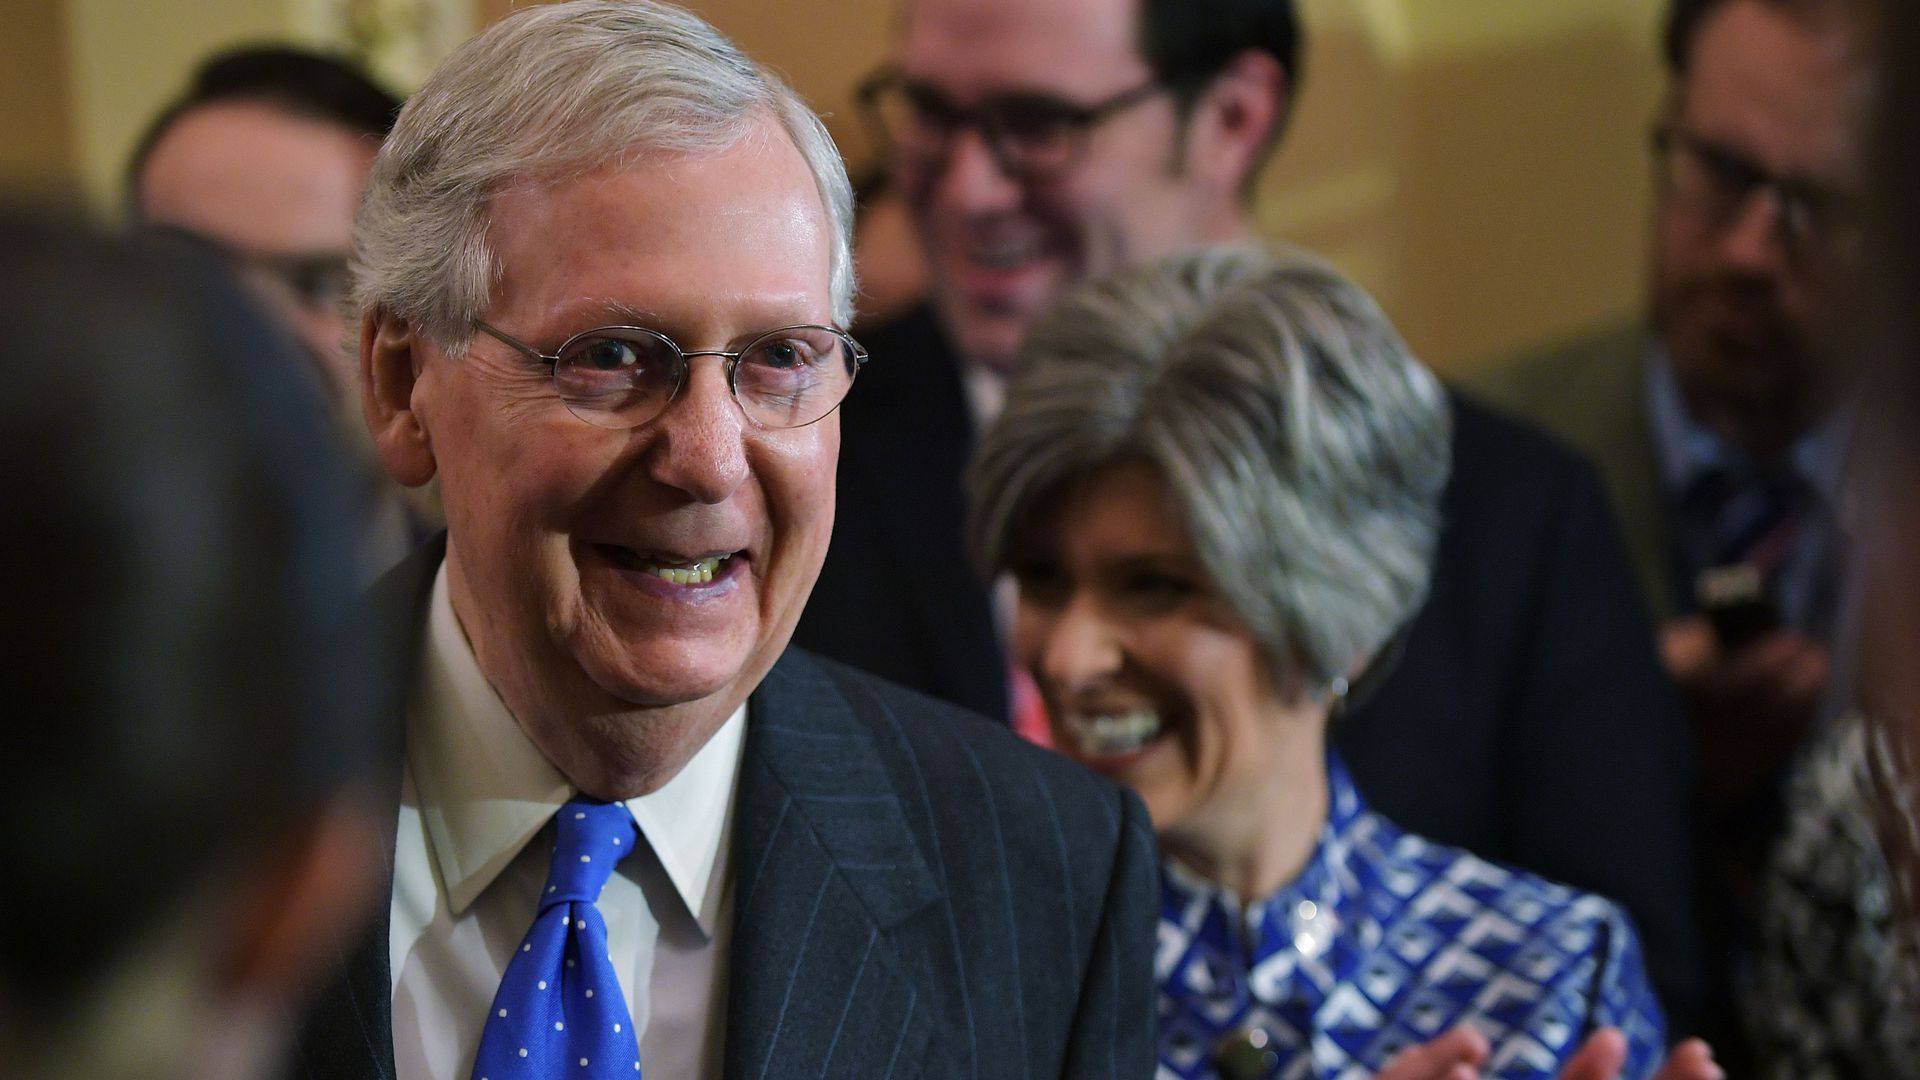 Mitch McConnell smiles during Wednesday's leadership vote